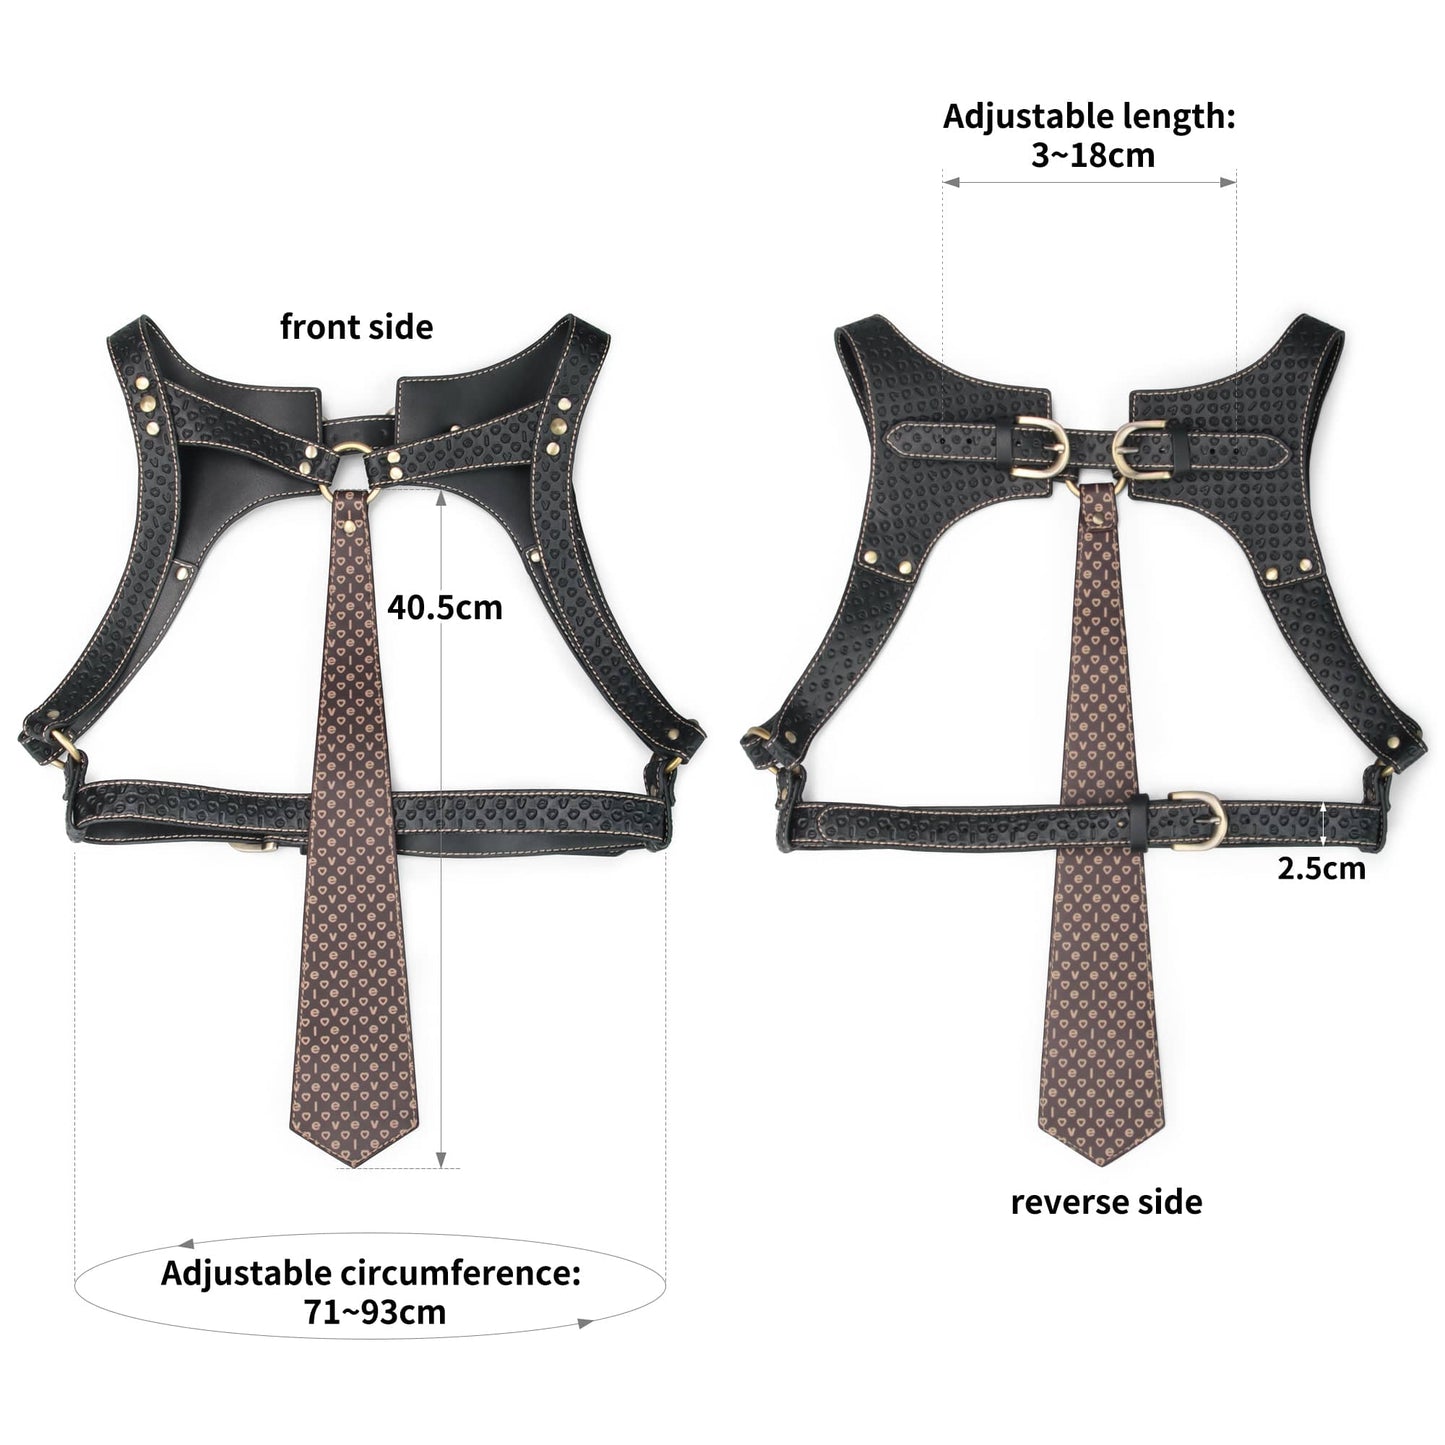 The size of the top part of the rebellion reign full body harness